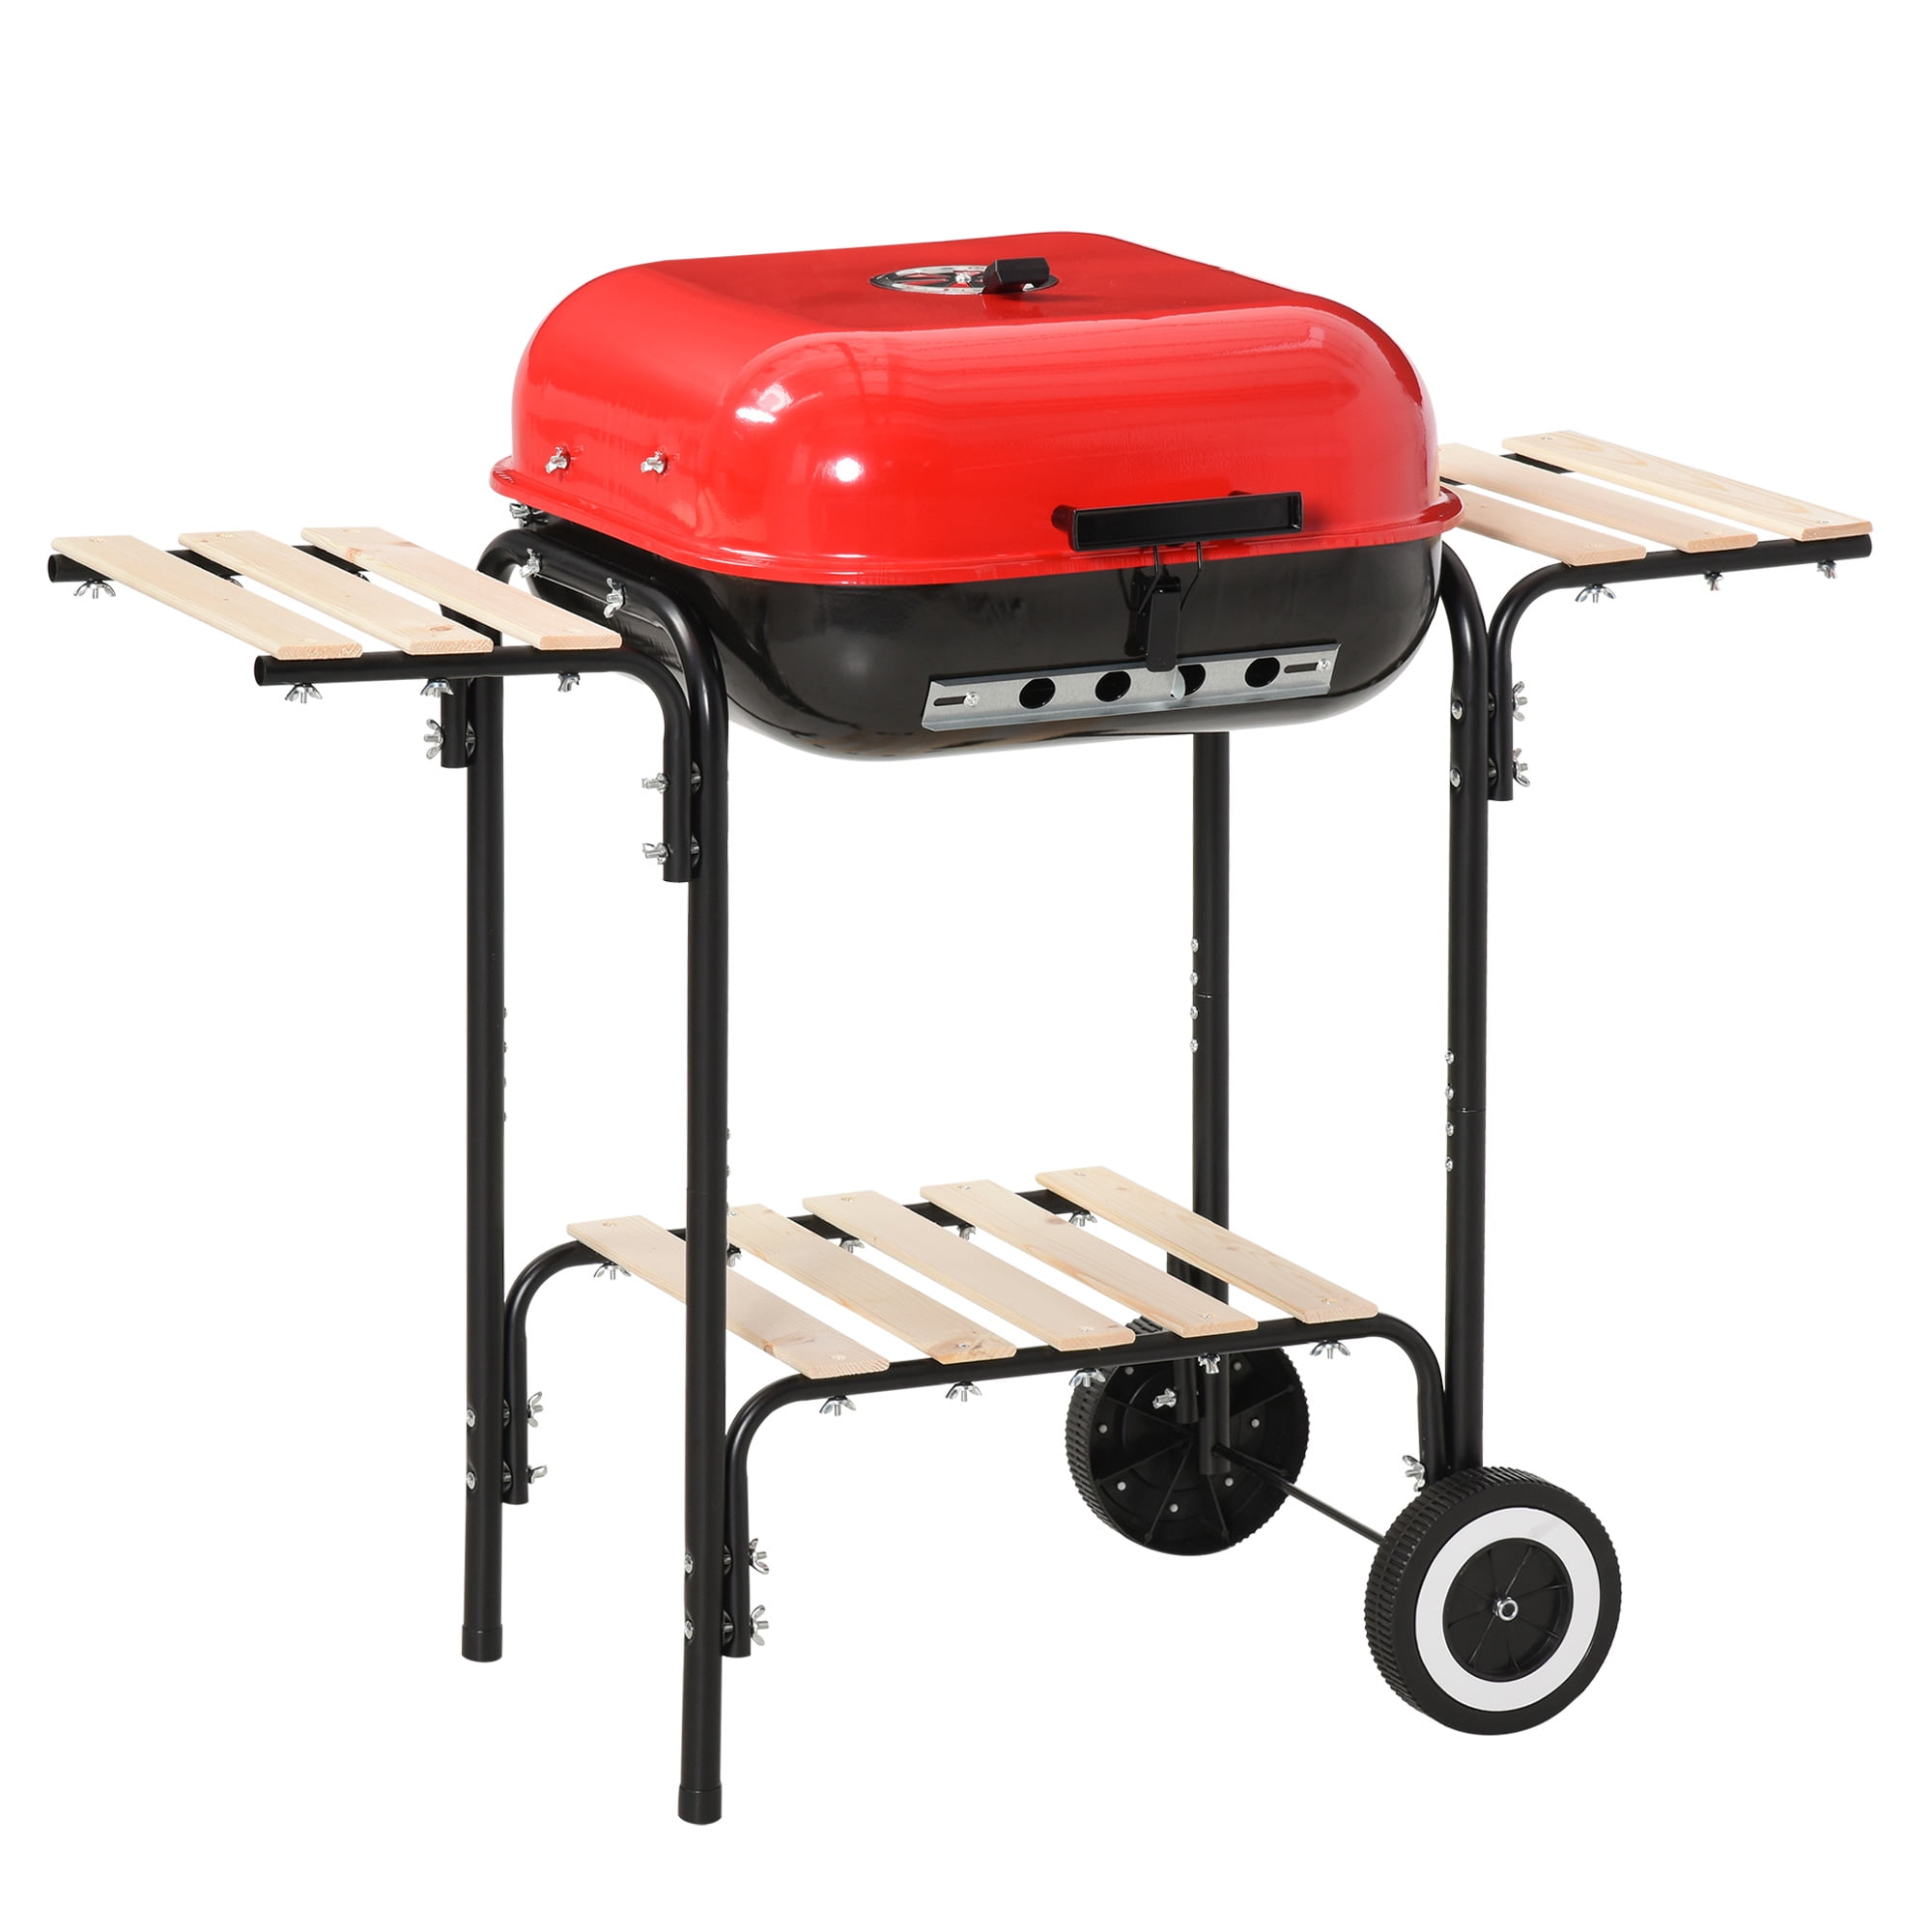 show original title Details about   Stainless steel barbecue BBQ Charcoal Barbecue foldable port b1e 